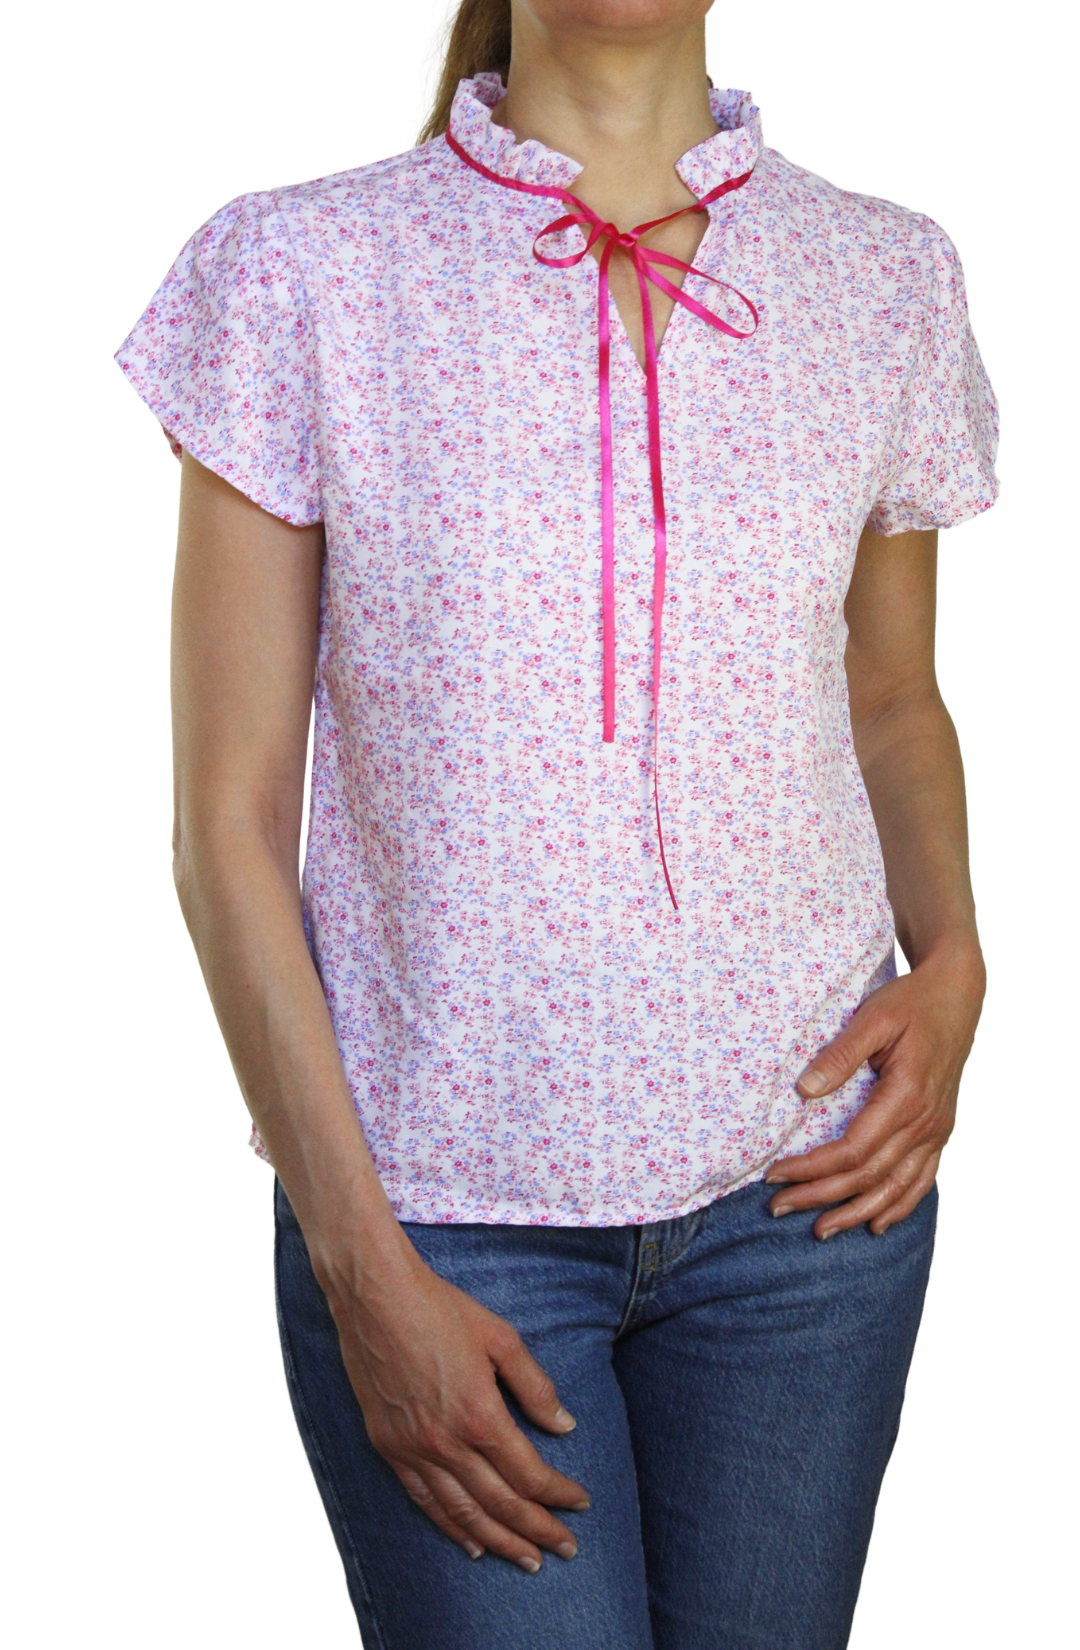 Blusa Lila Floral 10064 Mujer